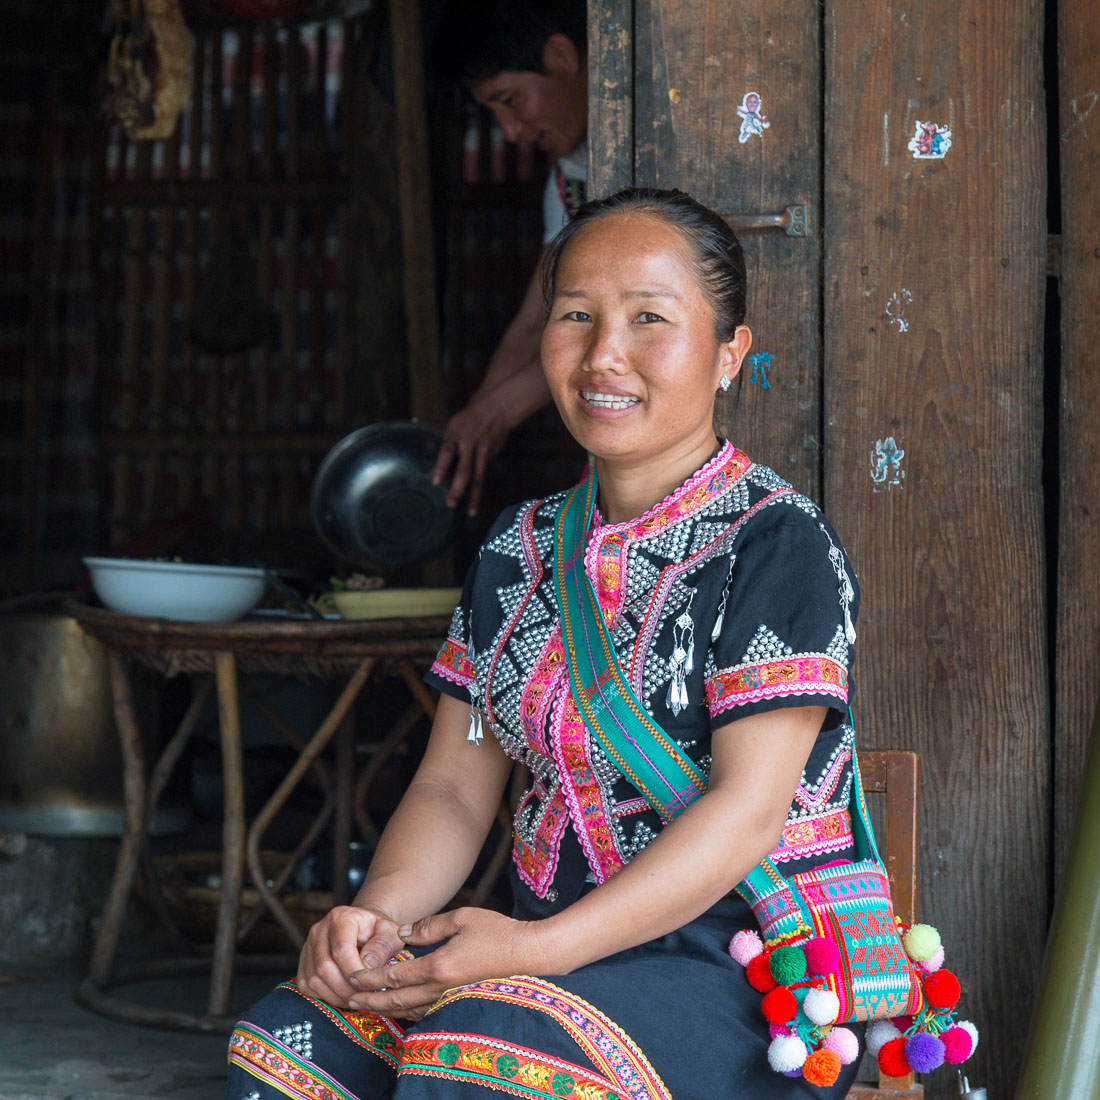 A joyful young woman from the La Hu ethnic minority people, proudly wearing the treditional costume. Lao Ba Village, Lan Cang County, Yunnan Province, China, Asia. Nikon D4, 24-120mm, f/4.0, VR